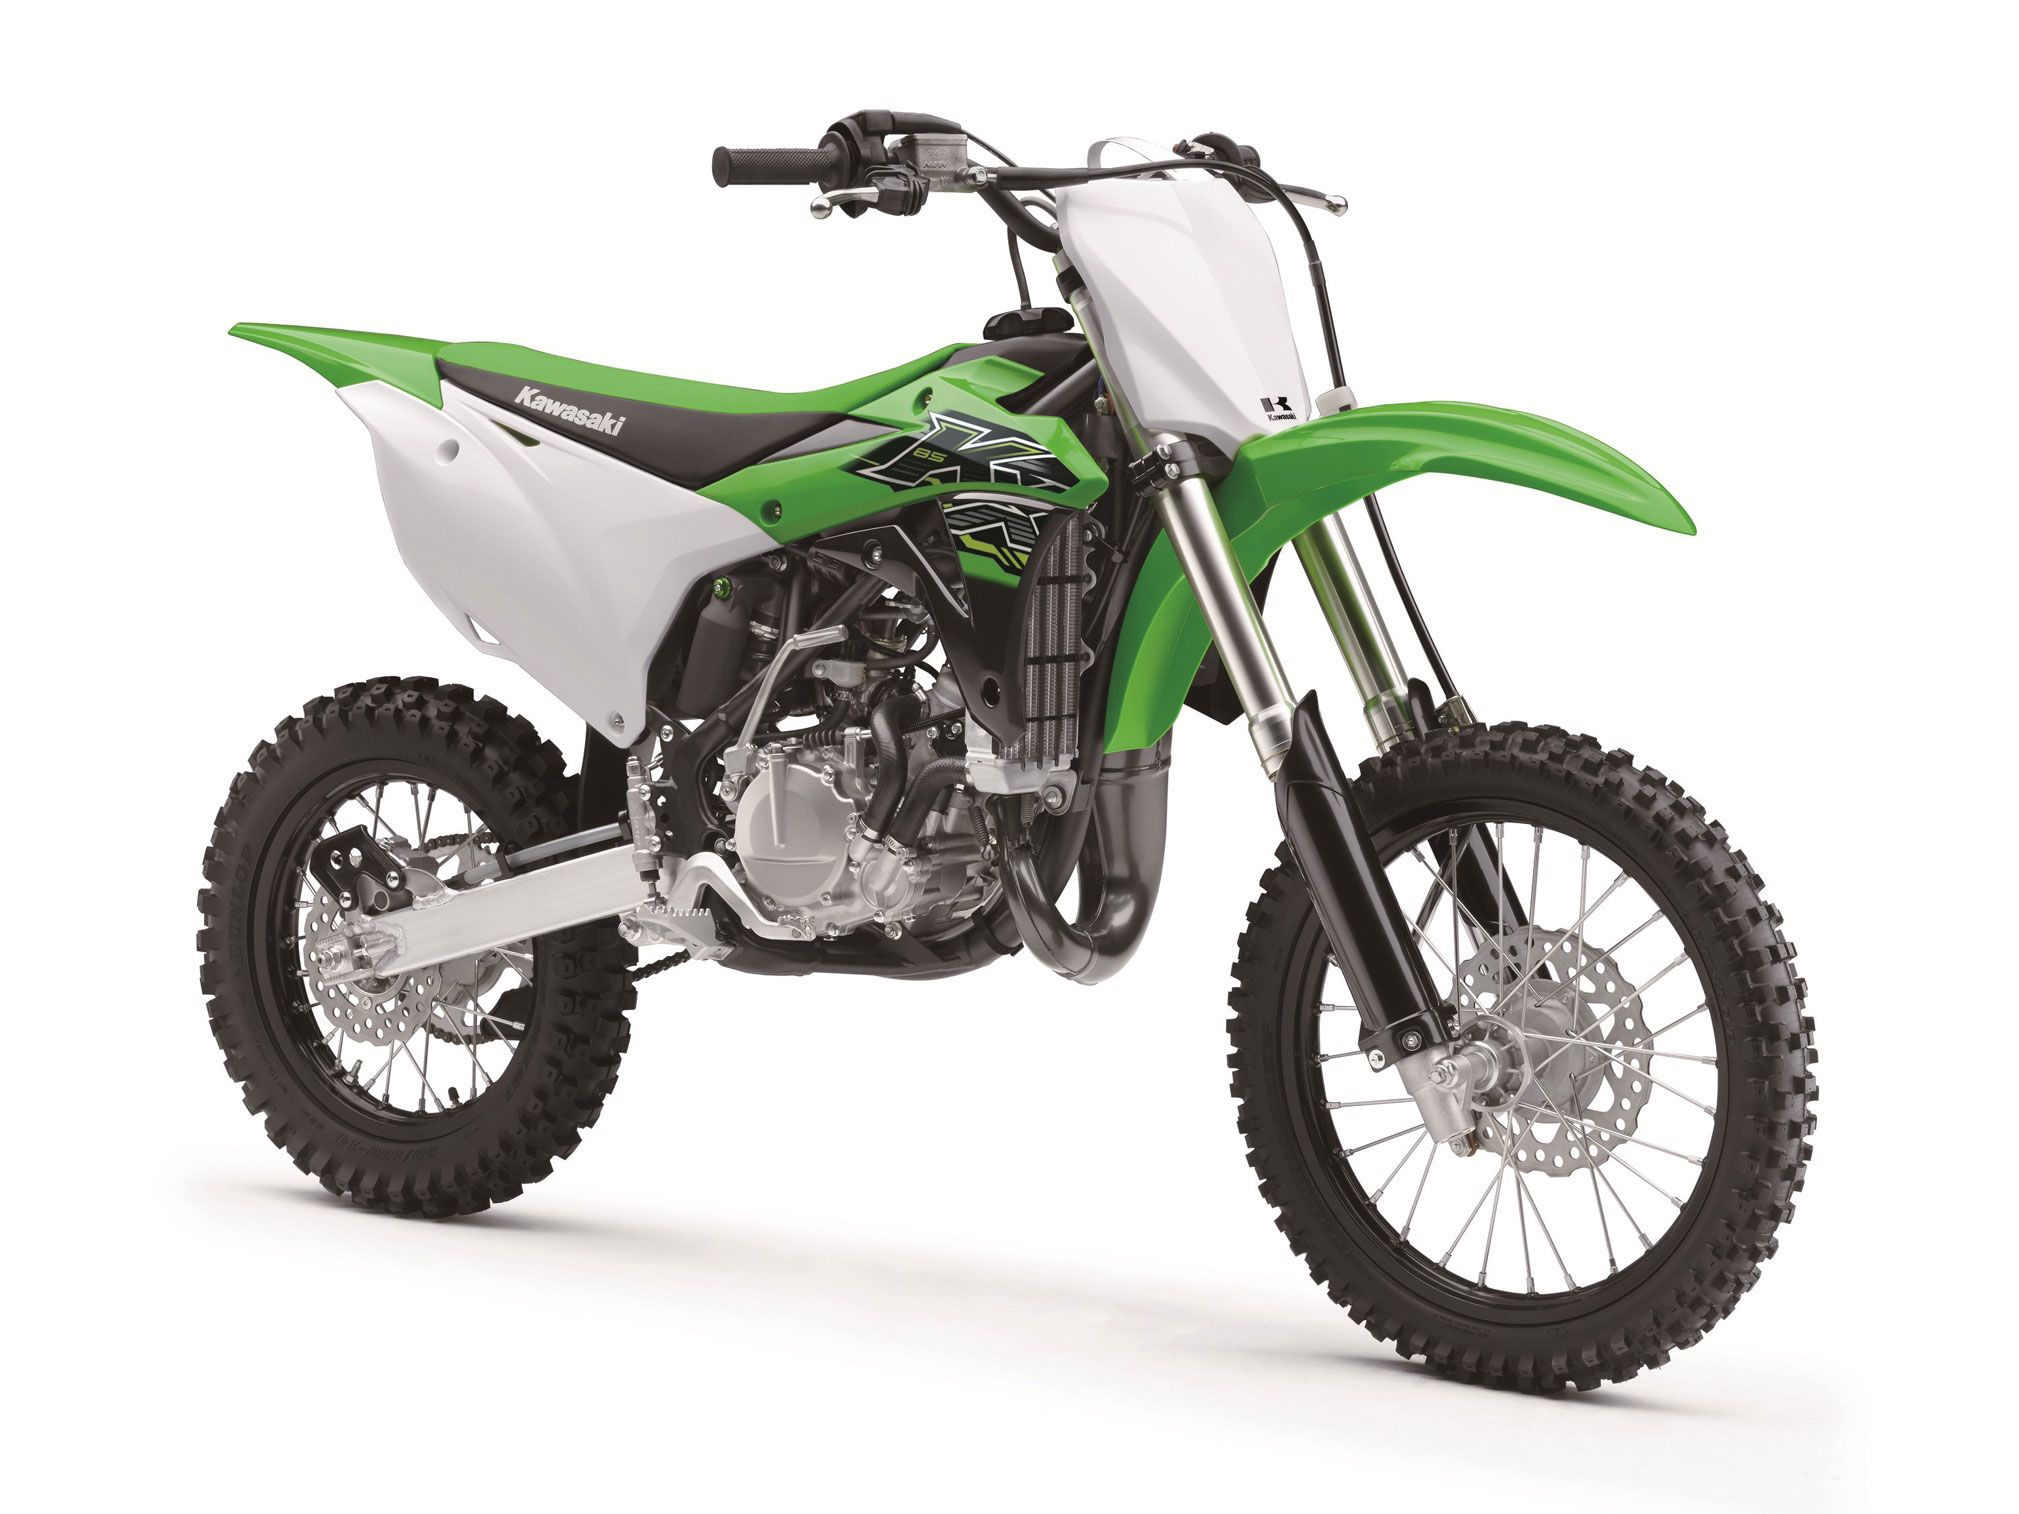 2019 KX85 Guide • Motorcycle